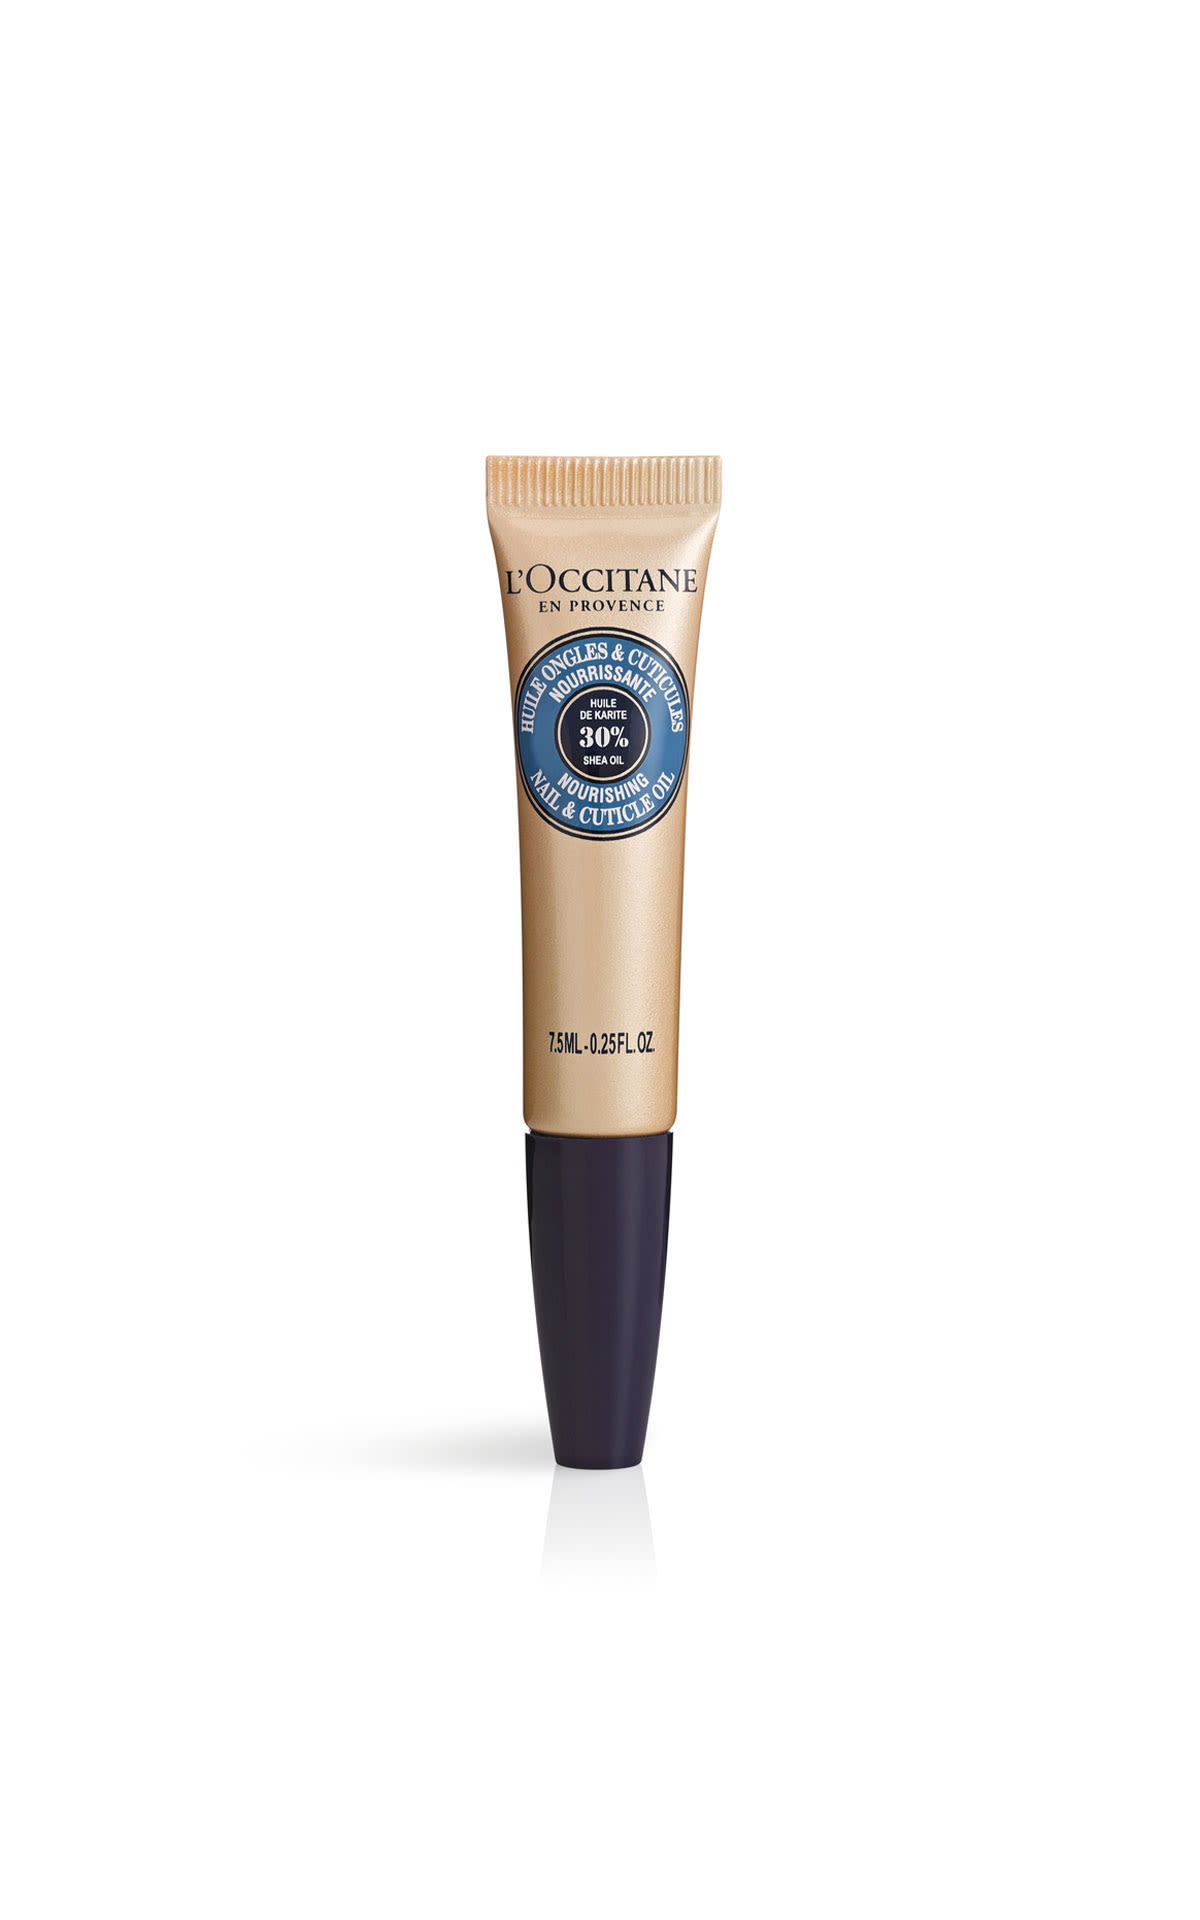 L'Occitane en Provence Nourishing nail and cuticle oil 7.5ml from Bicester Village